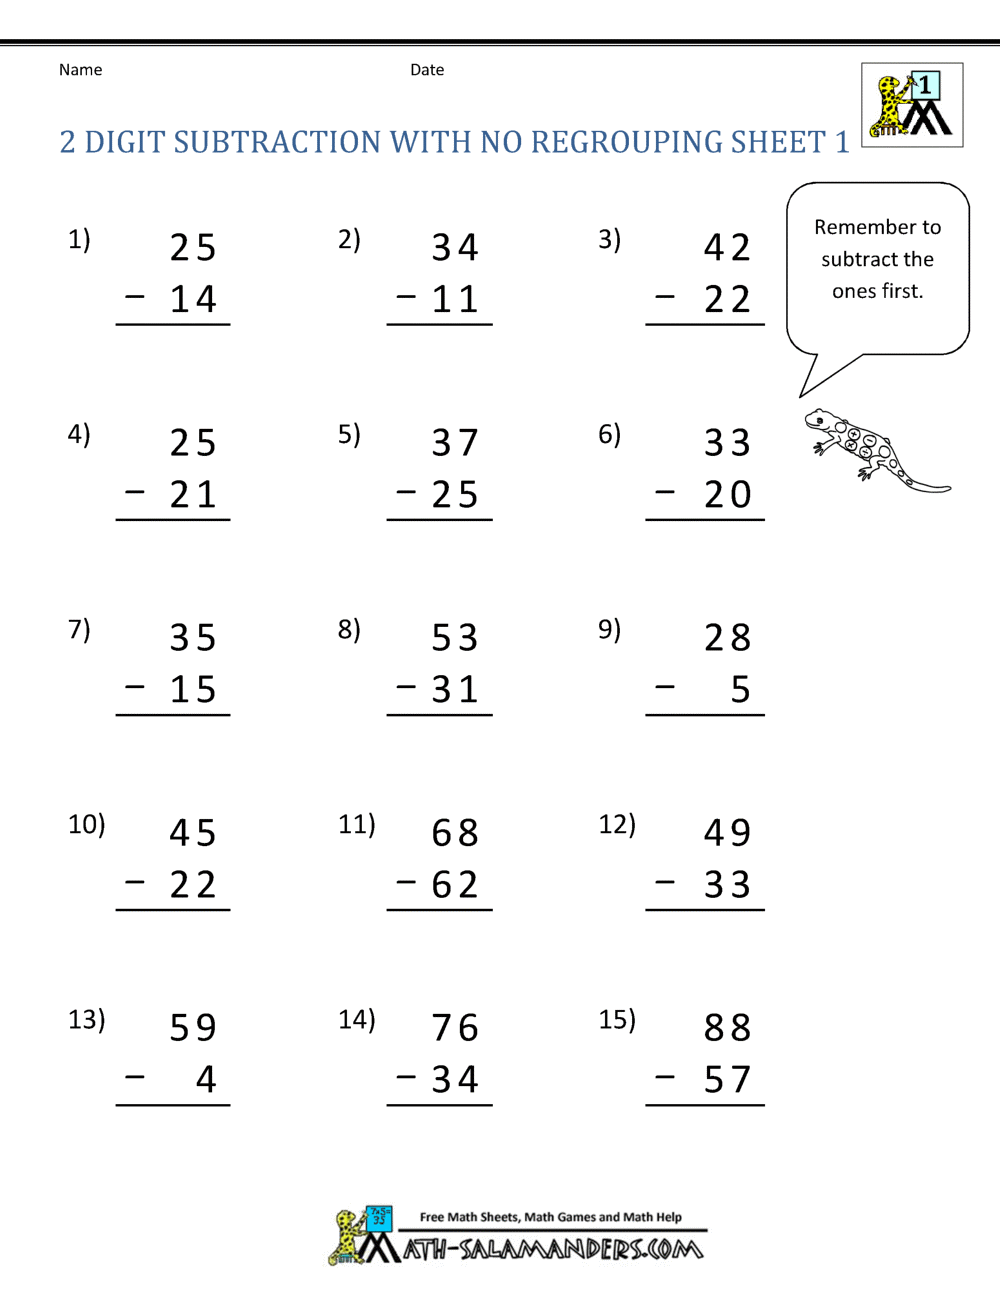 subtraction-with-and-without-regrouping-worksheets-worksheetscity